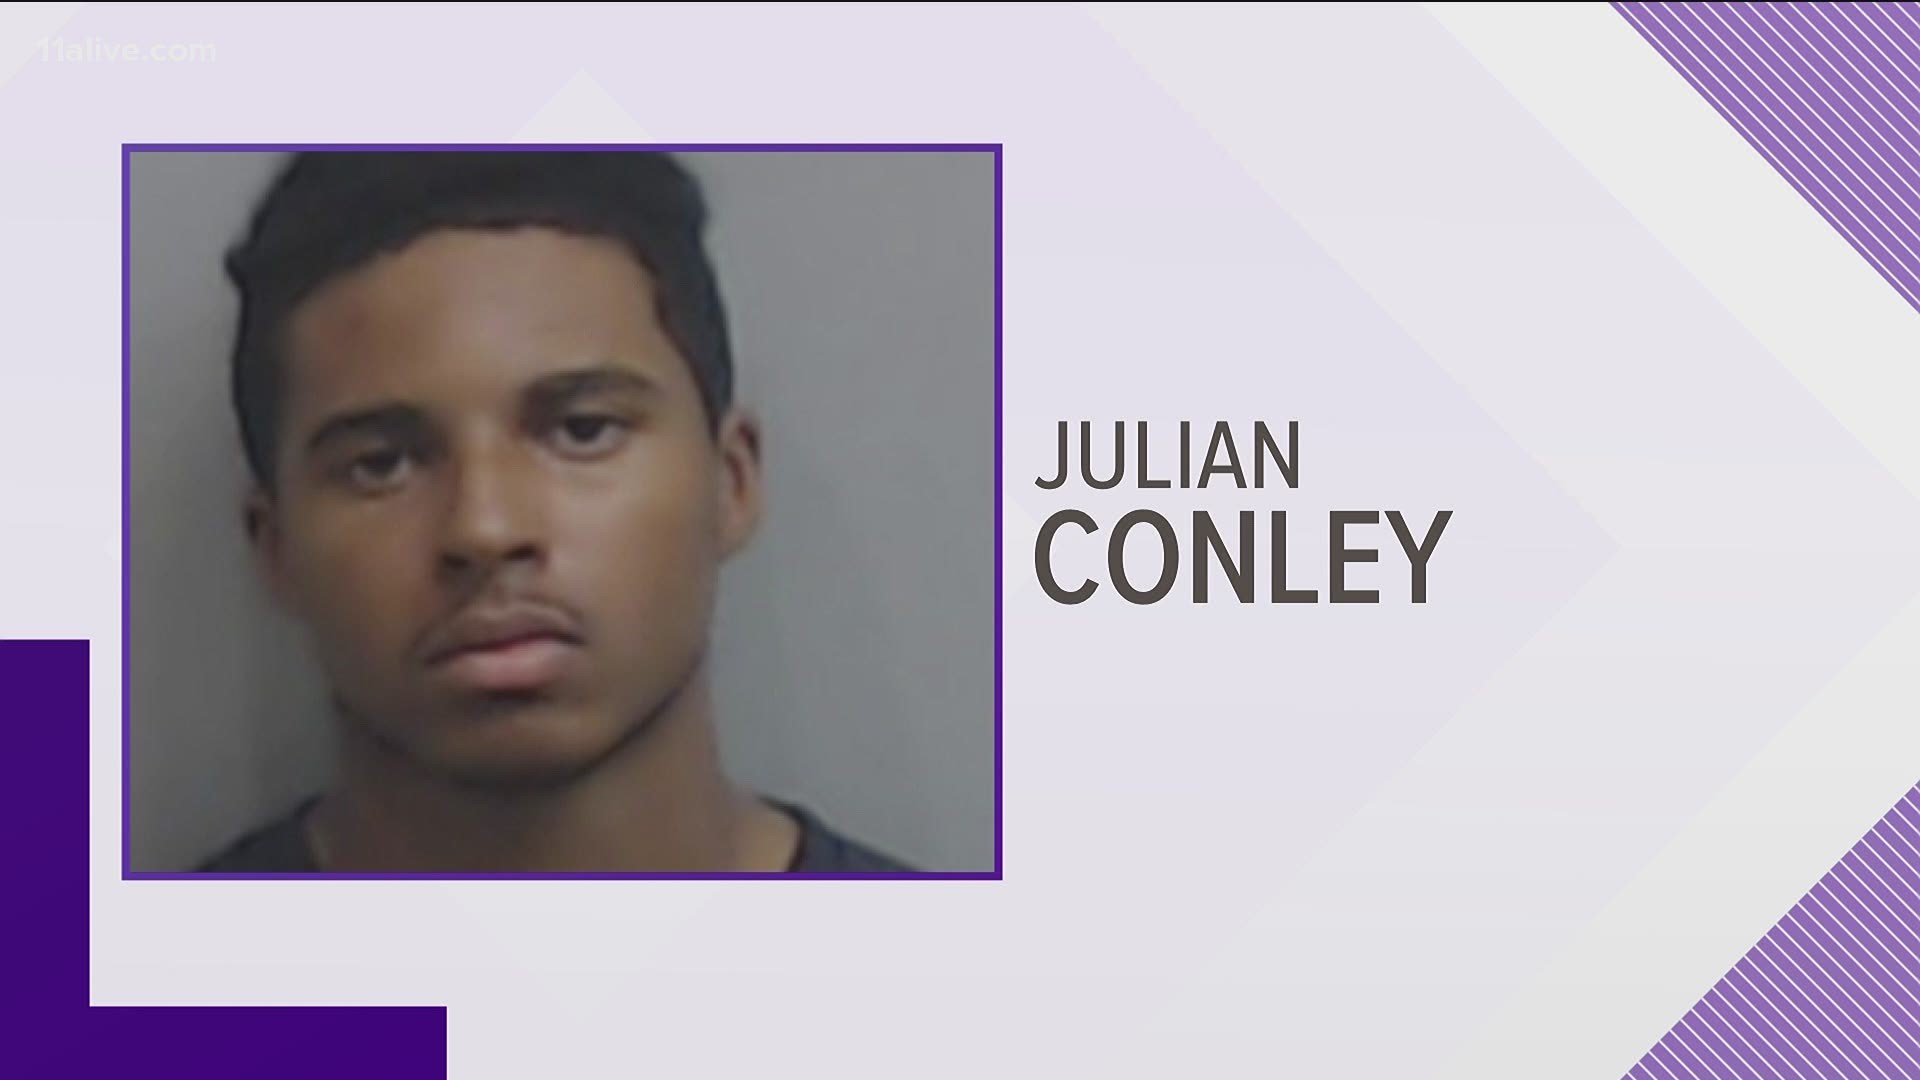 A judge made the ruling during a Thursday court appearance for Julian Conley.